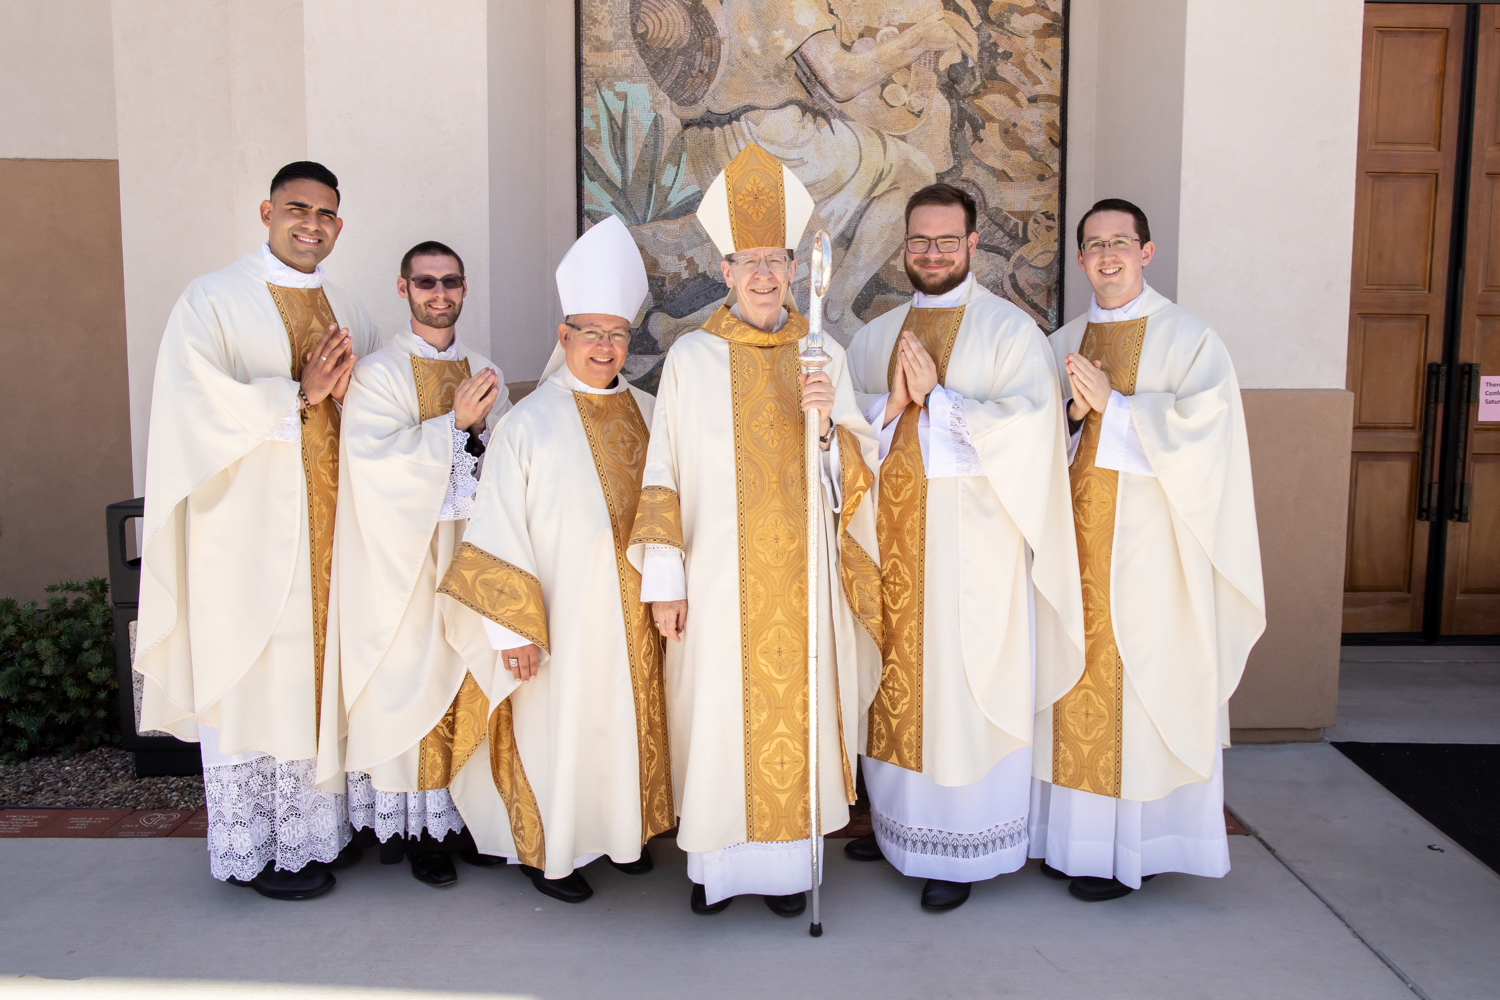 diocese of phoenix priest assignments 2021